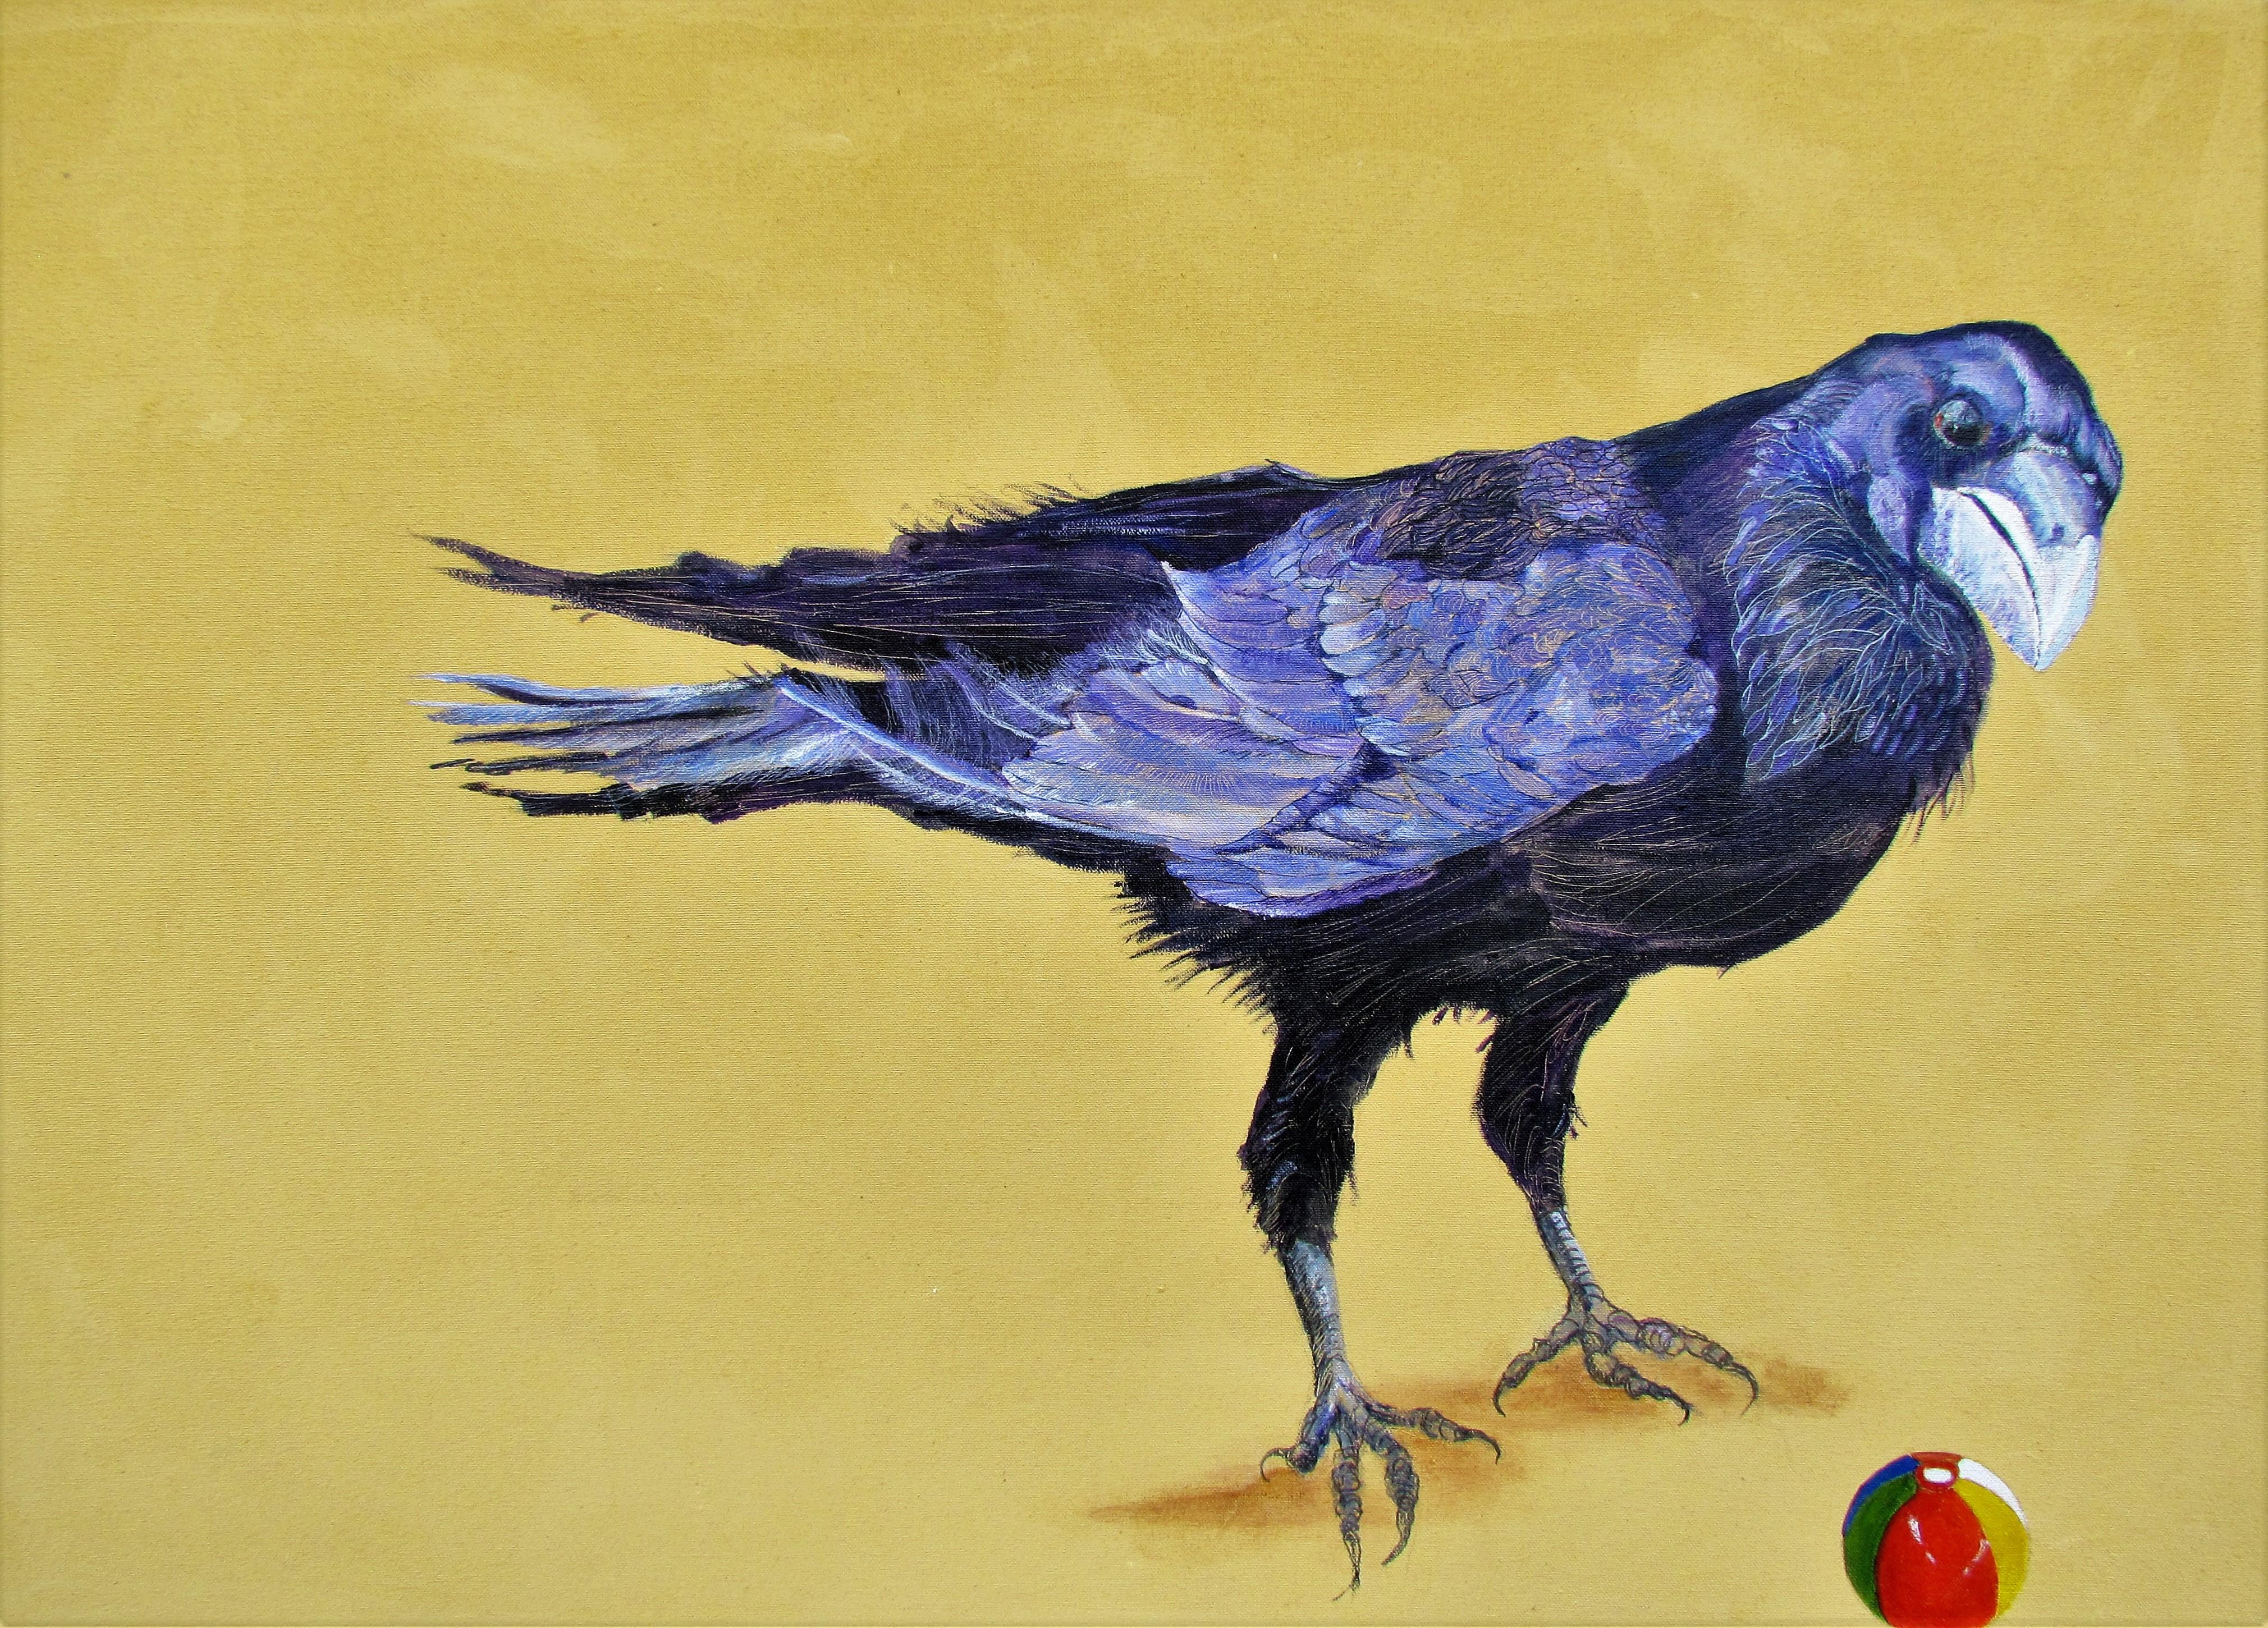 Alison Keenan Animal Painting - Avian Fables: Raven and Beach Ball 1 - acrylic and ink on canvas